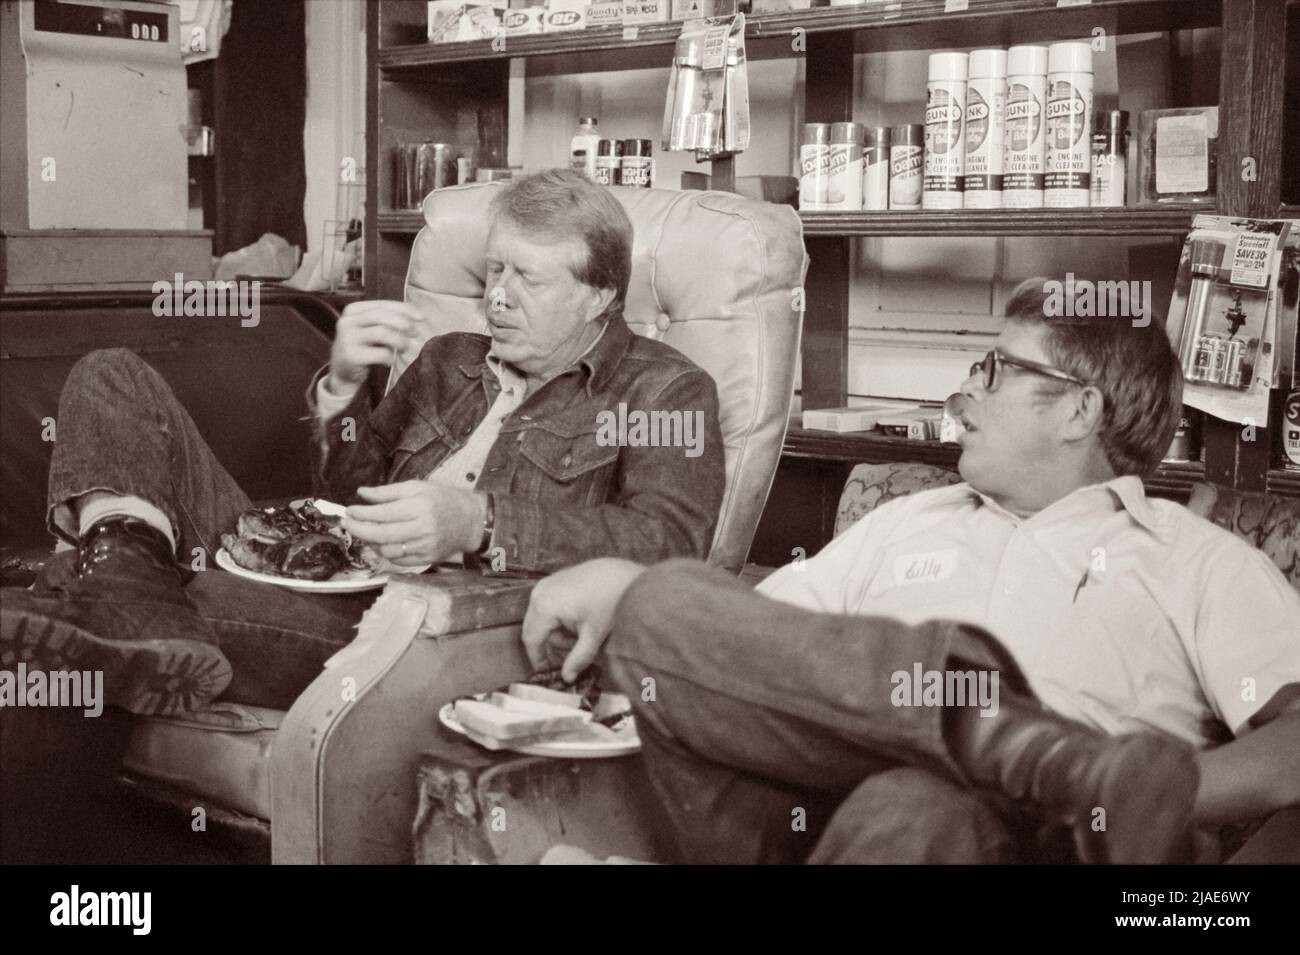 Jimmy Carter eating with his brother, Billy Carter, during a campaign stop at his Billy's gas station in their hometown of Plains, Georgia on September 10, 1976. (USA) Stock Photo